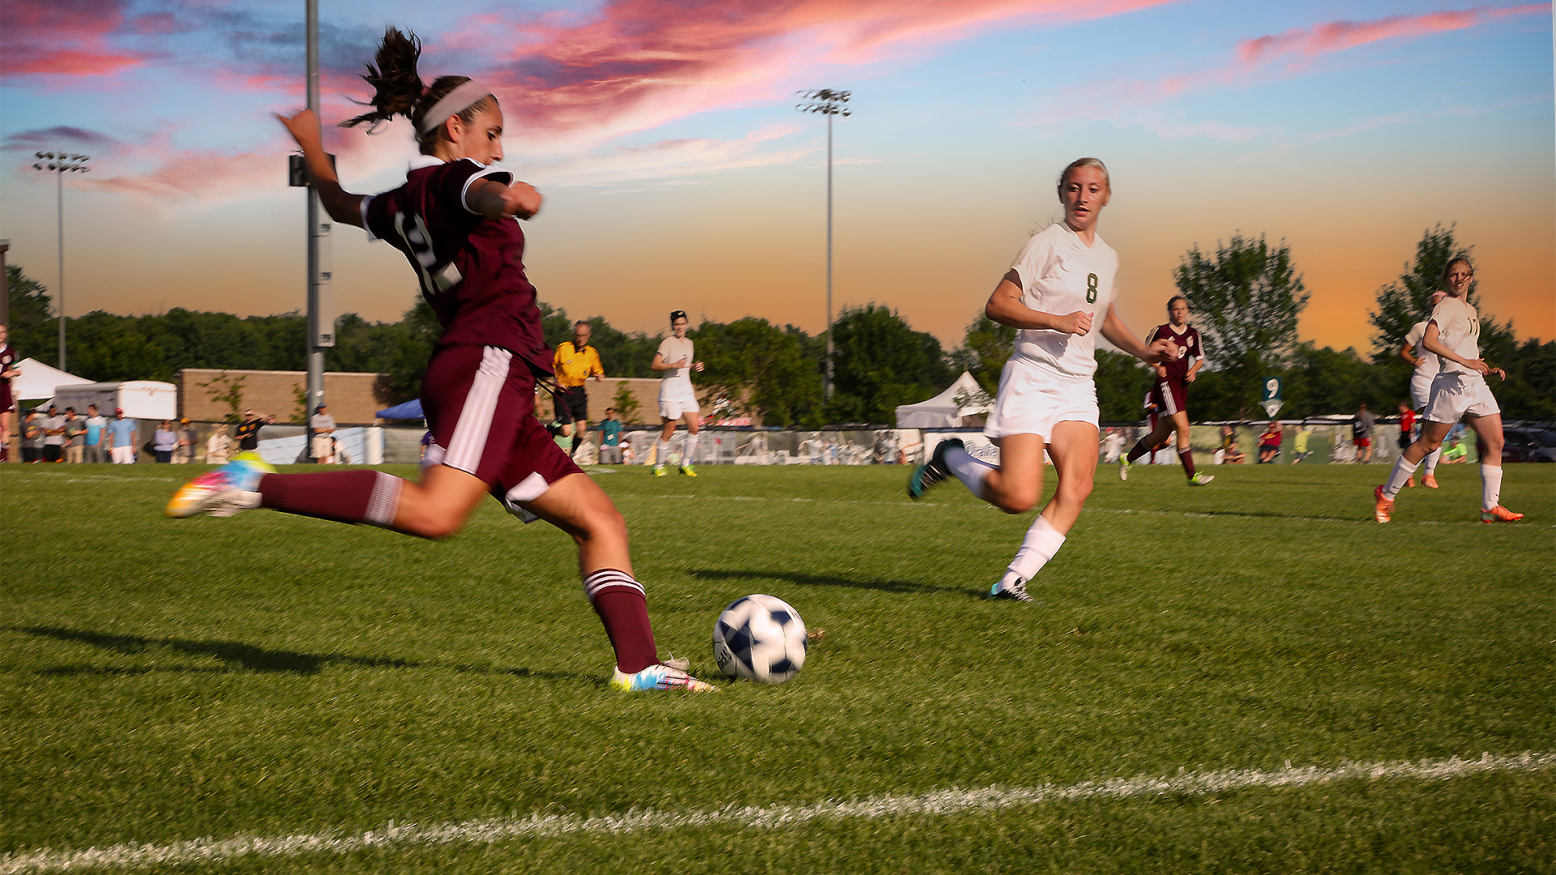 A soccer player in a maroon uniform is in mid-kick of a soccer ball. Another player wearing a white uniform approaches her to defend the ball from advancing down the field. Additional players are in the background, wearing maroon or white uniforms, as well as a referee wearing a yellow uniform. 